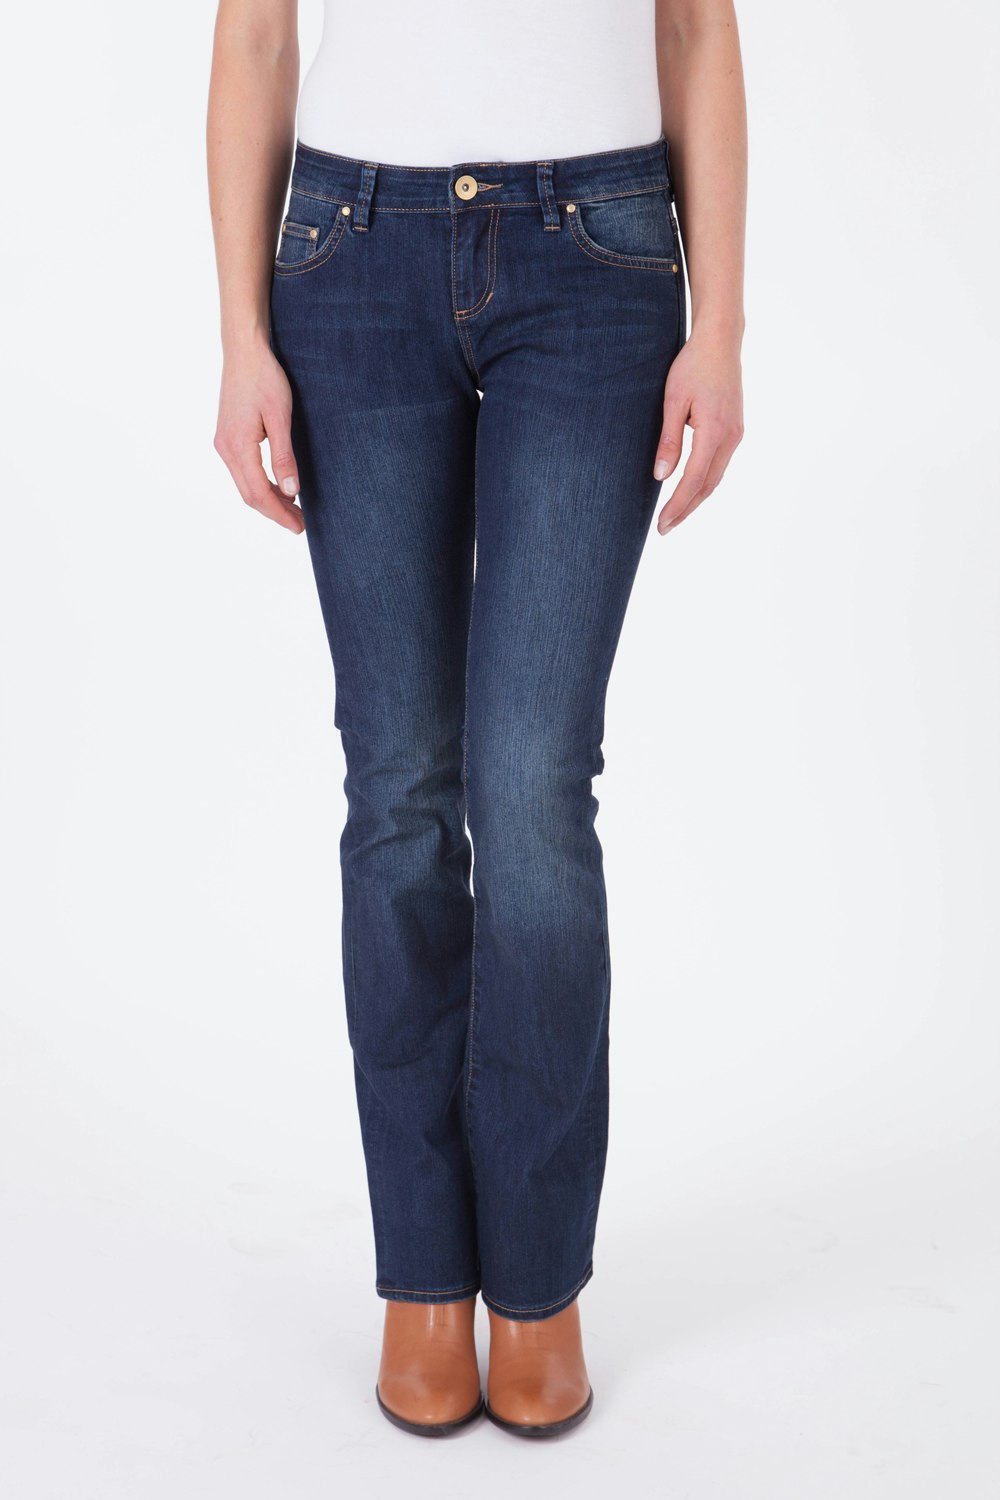 Riders By Lee Bumster Bootcut Jean - Womens Bootcut Jeans at Birdsnest ...